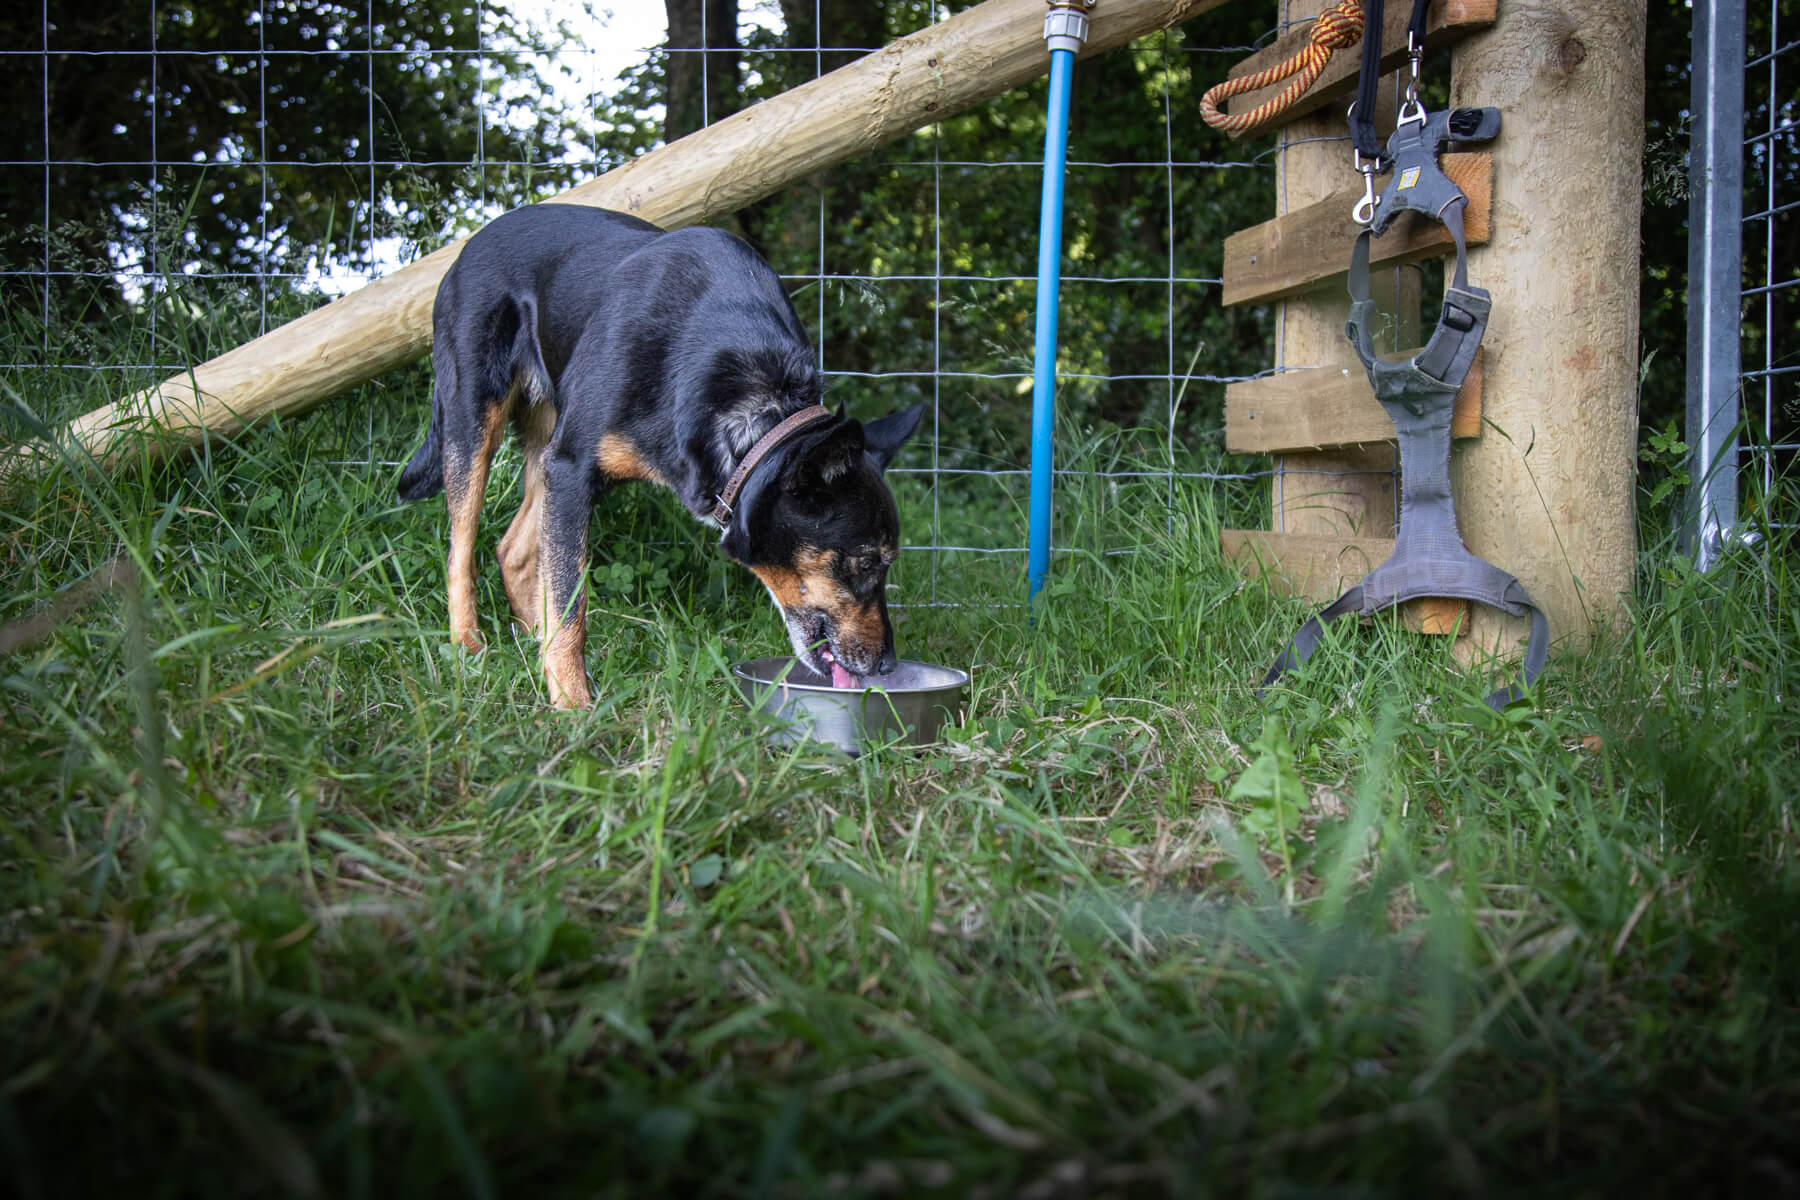 Water facilities for dogs at secure dog exercise field - Westy & Worzel Salcombe Road, Sidmouth, East Devon